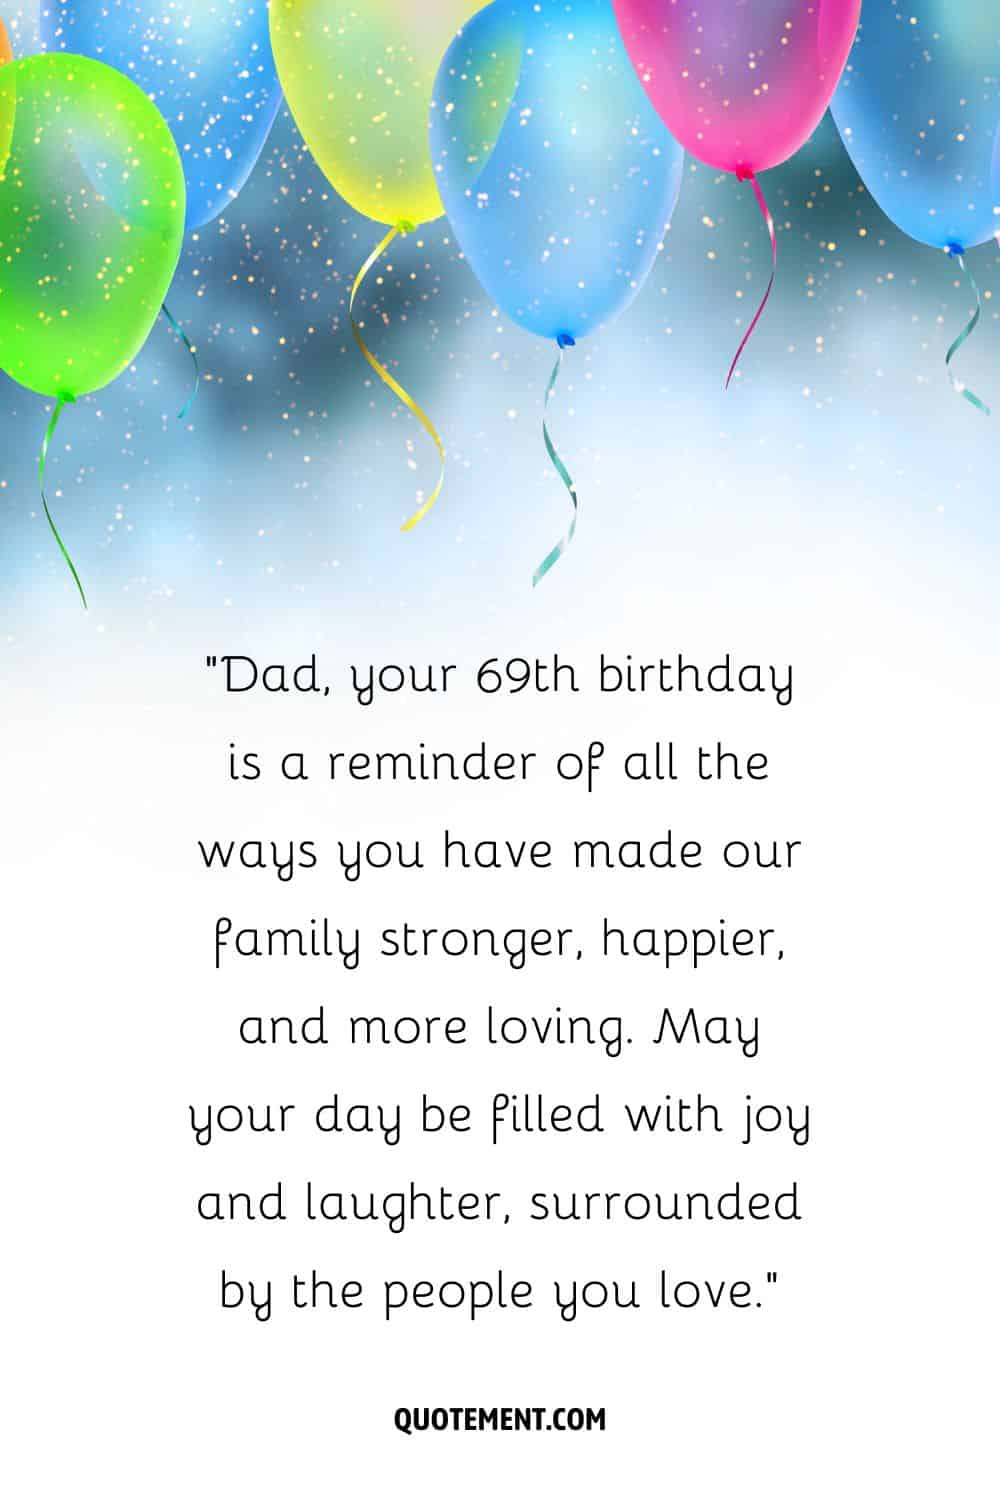 Dad, your 69th birthday is a reminder of all the ways you have made our family stronger, happier, and more loving. May your day be filled with joy and laughter, surrounded by the people you love